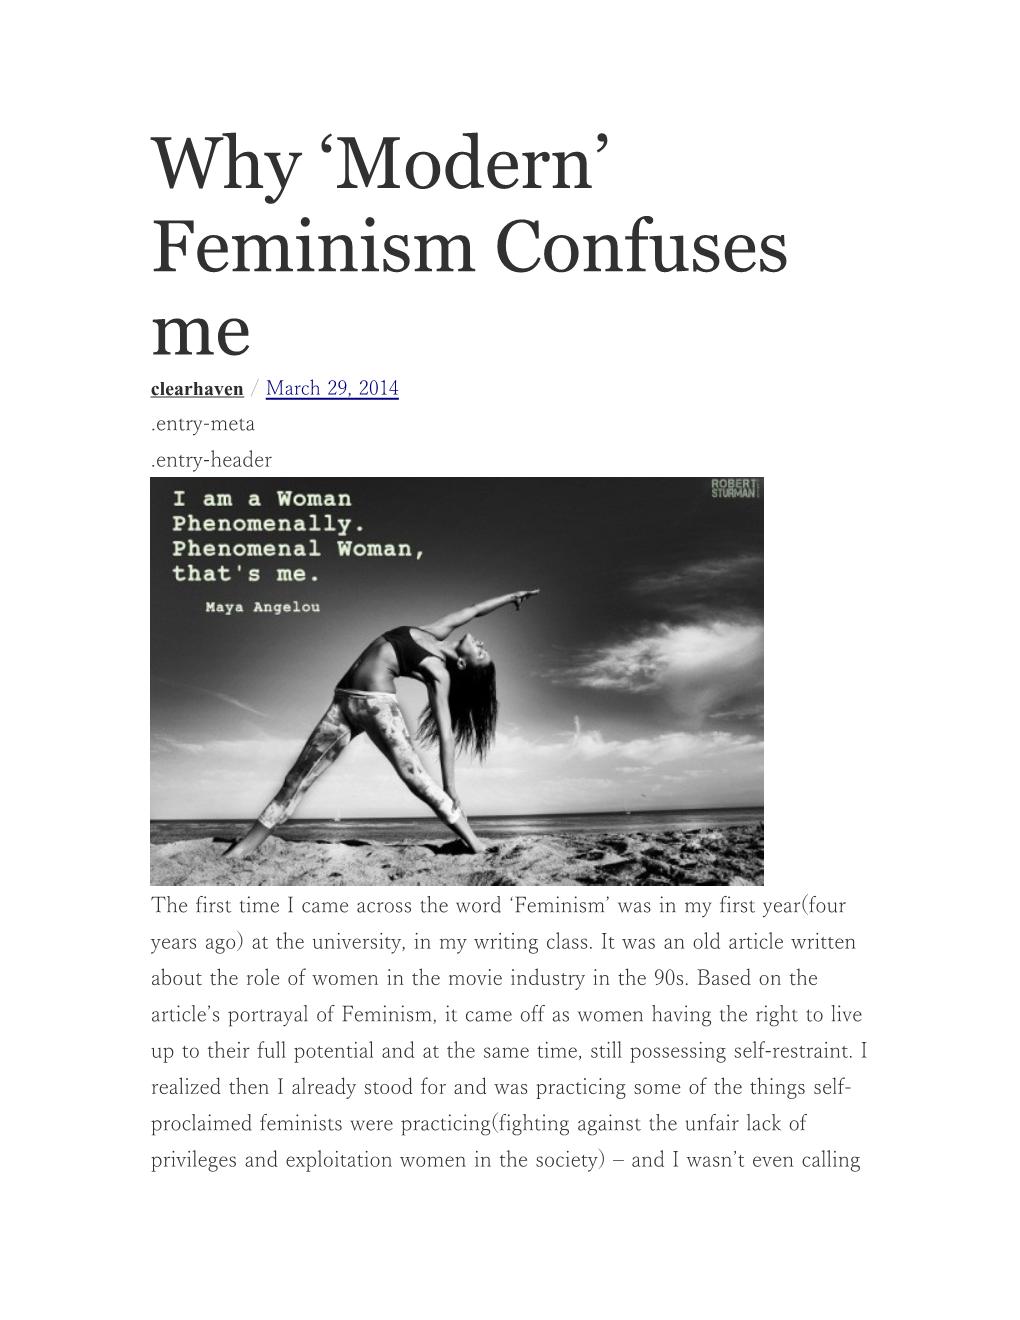 Why Modern Feminism Confuses Me